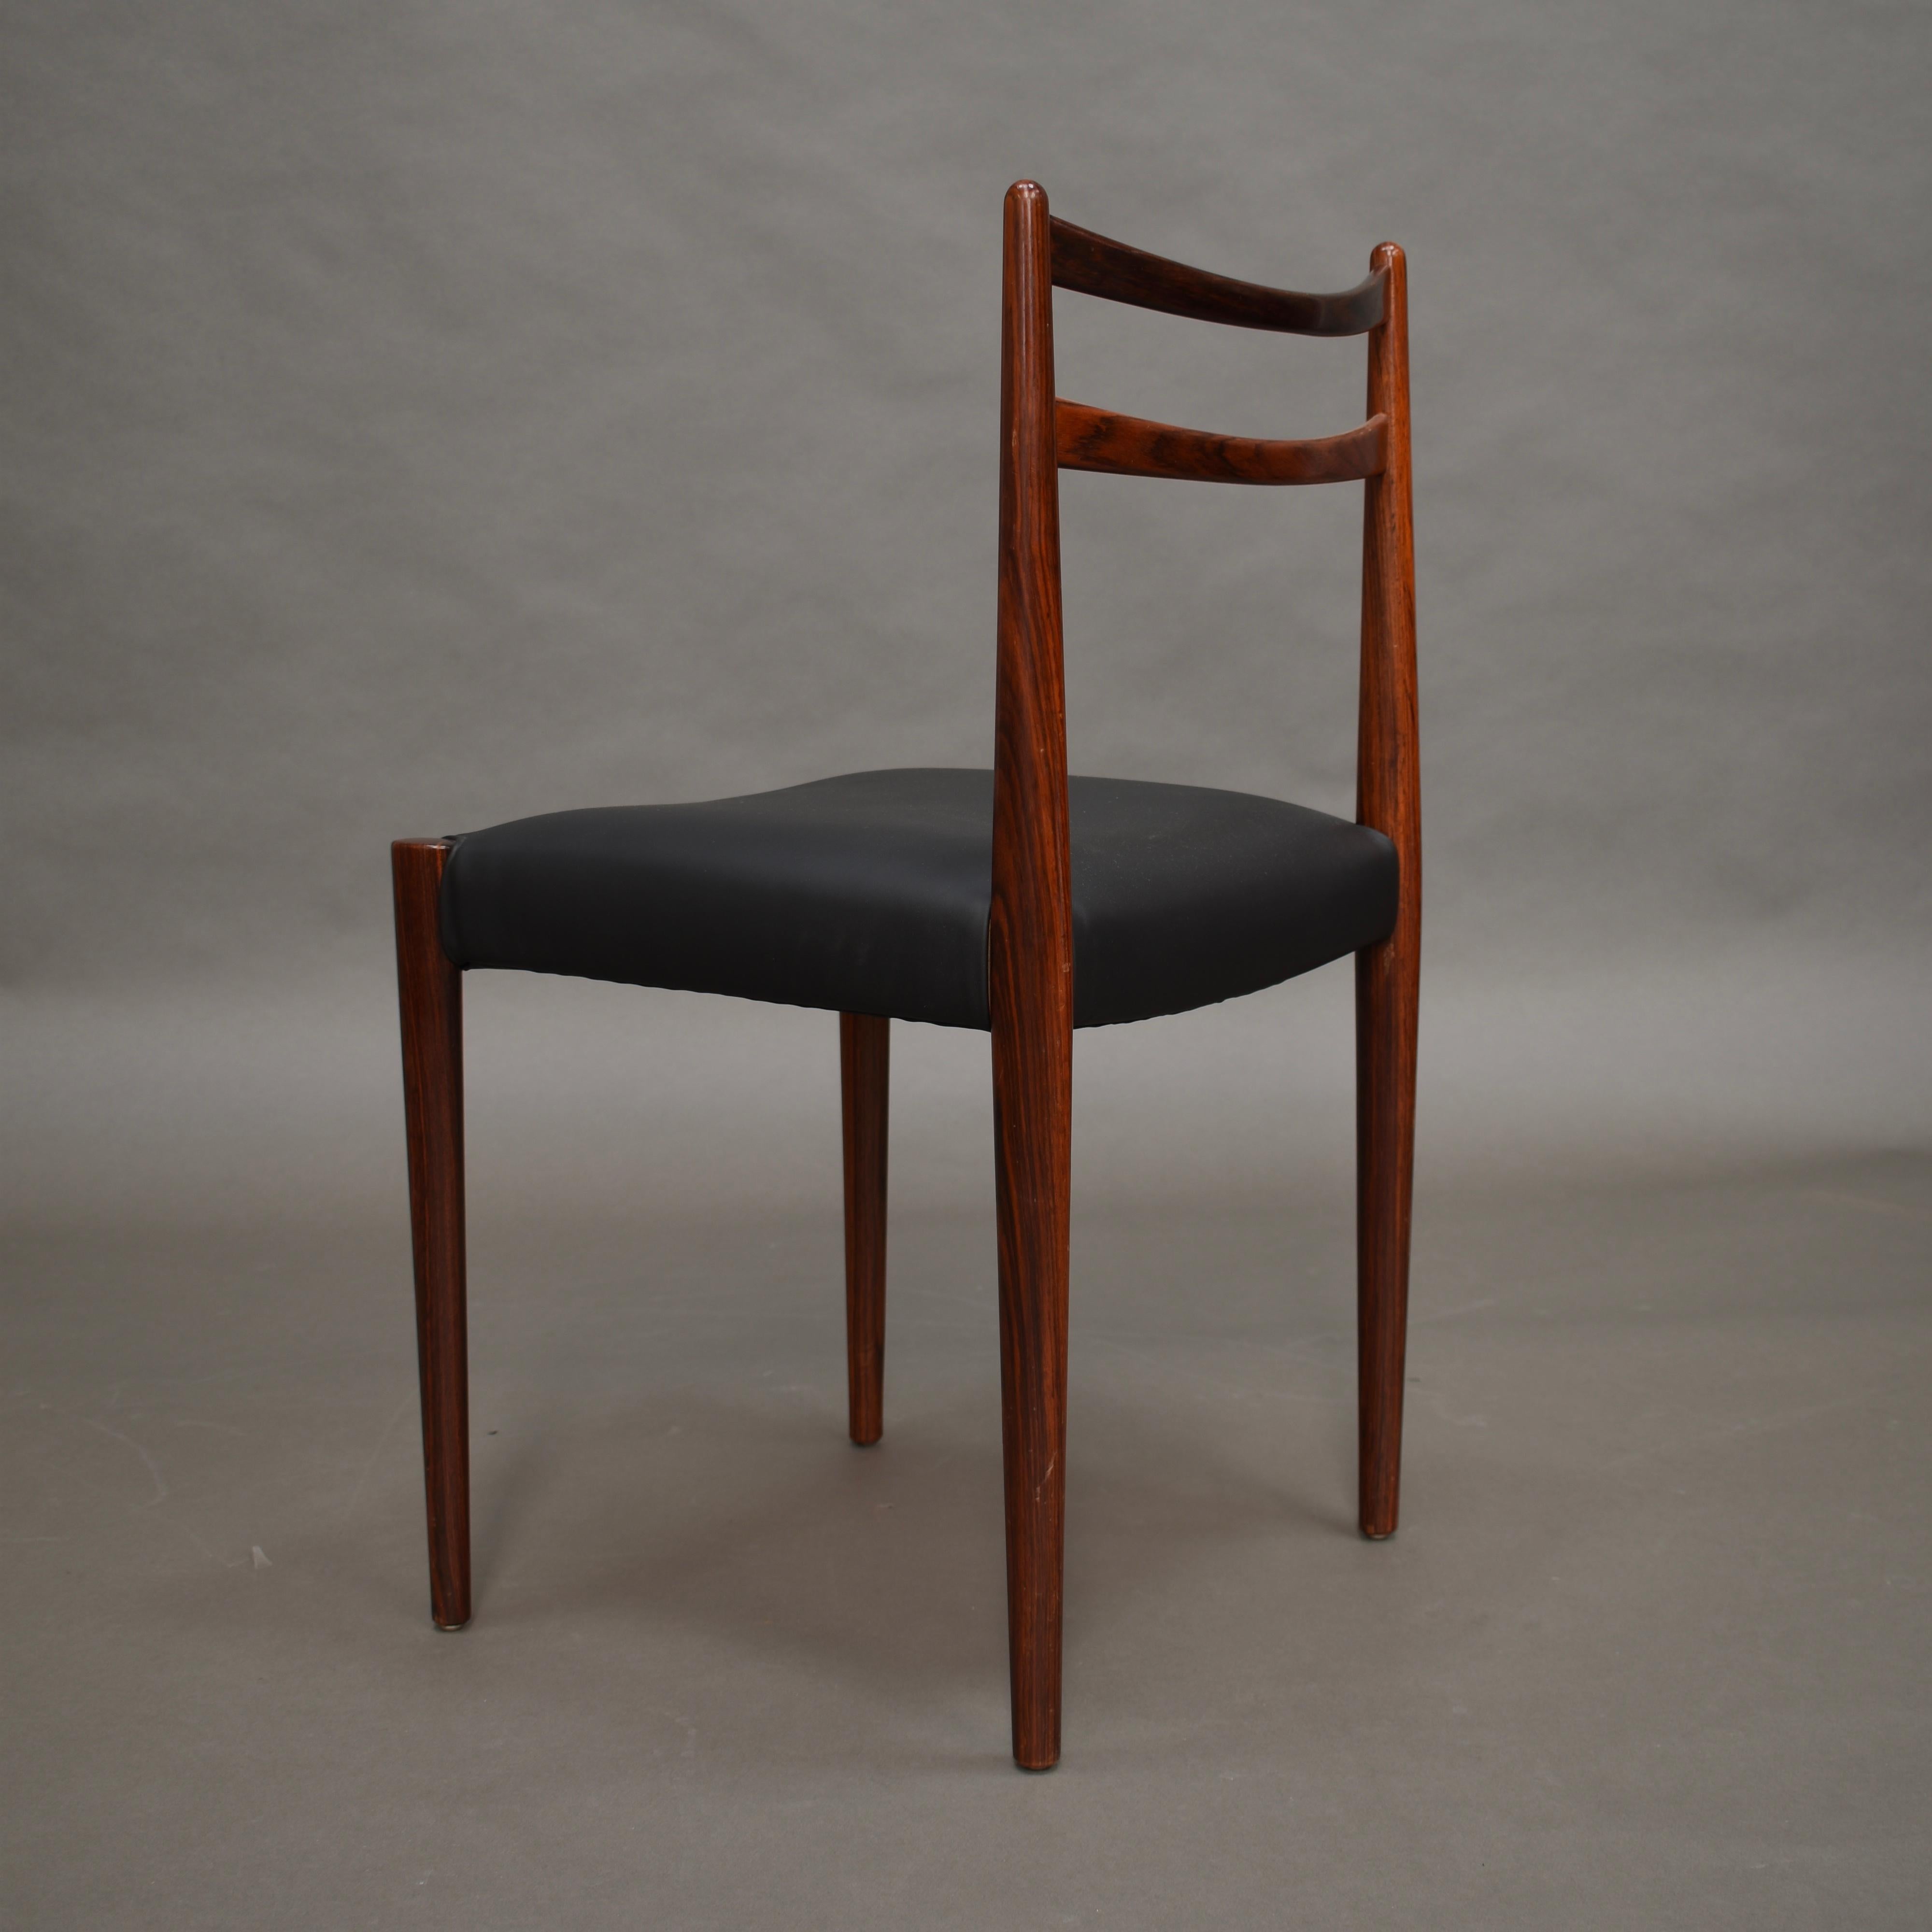 Danish Brazilian Rosewood Dining Chairs in New Black Leather, Denmark, 1950s 4